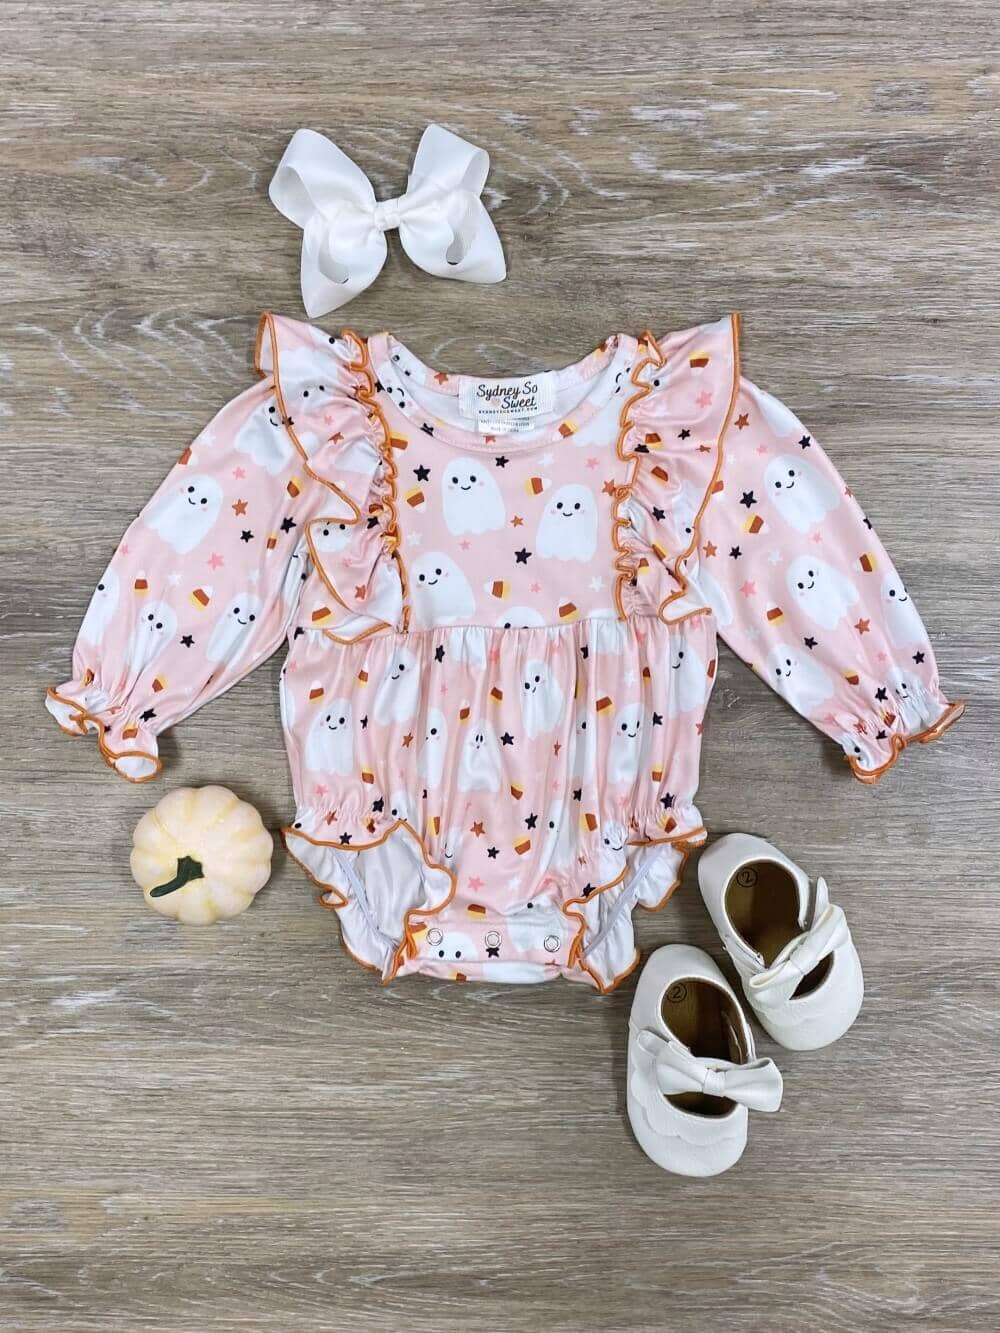 Baby Girl Clothes, Newborn Clothing for Baby Girl